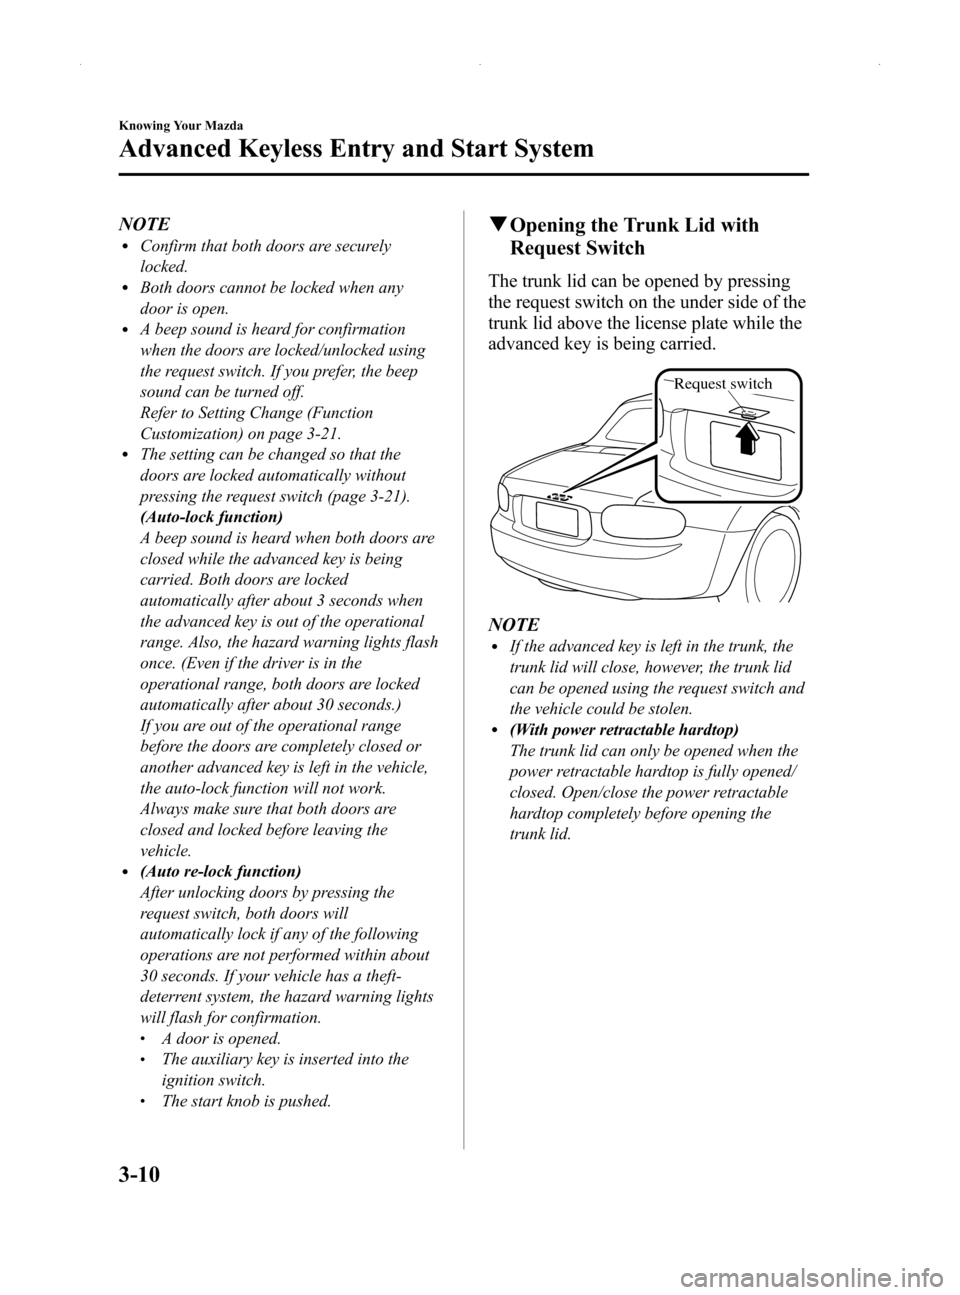 MAZDA MODEL MX-5 2014  Owners Manual (in English) Black plate (64,1)
NOTElConfirm that both doors are securely
locked.
lBoth doors cannot be locked when any
door is open.
lA beep sound is heard for confirmation
when the doors are locked/unlocked usin